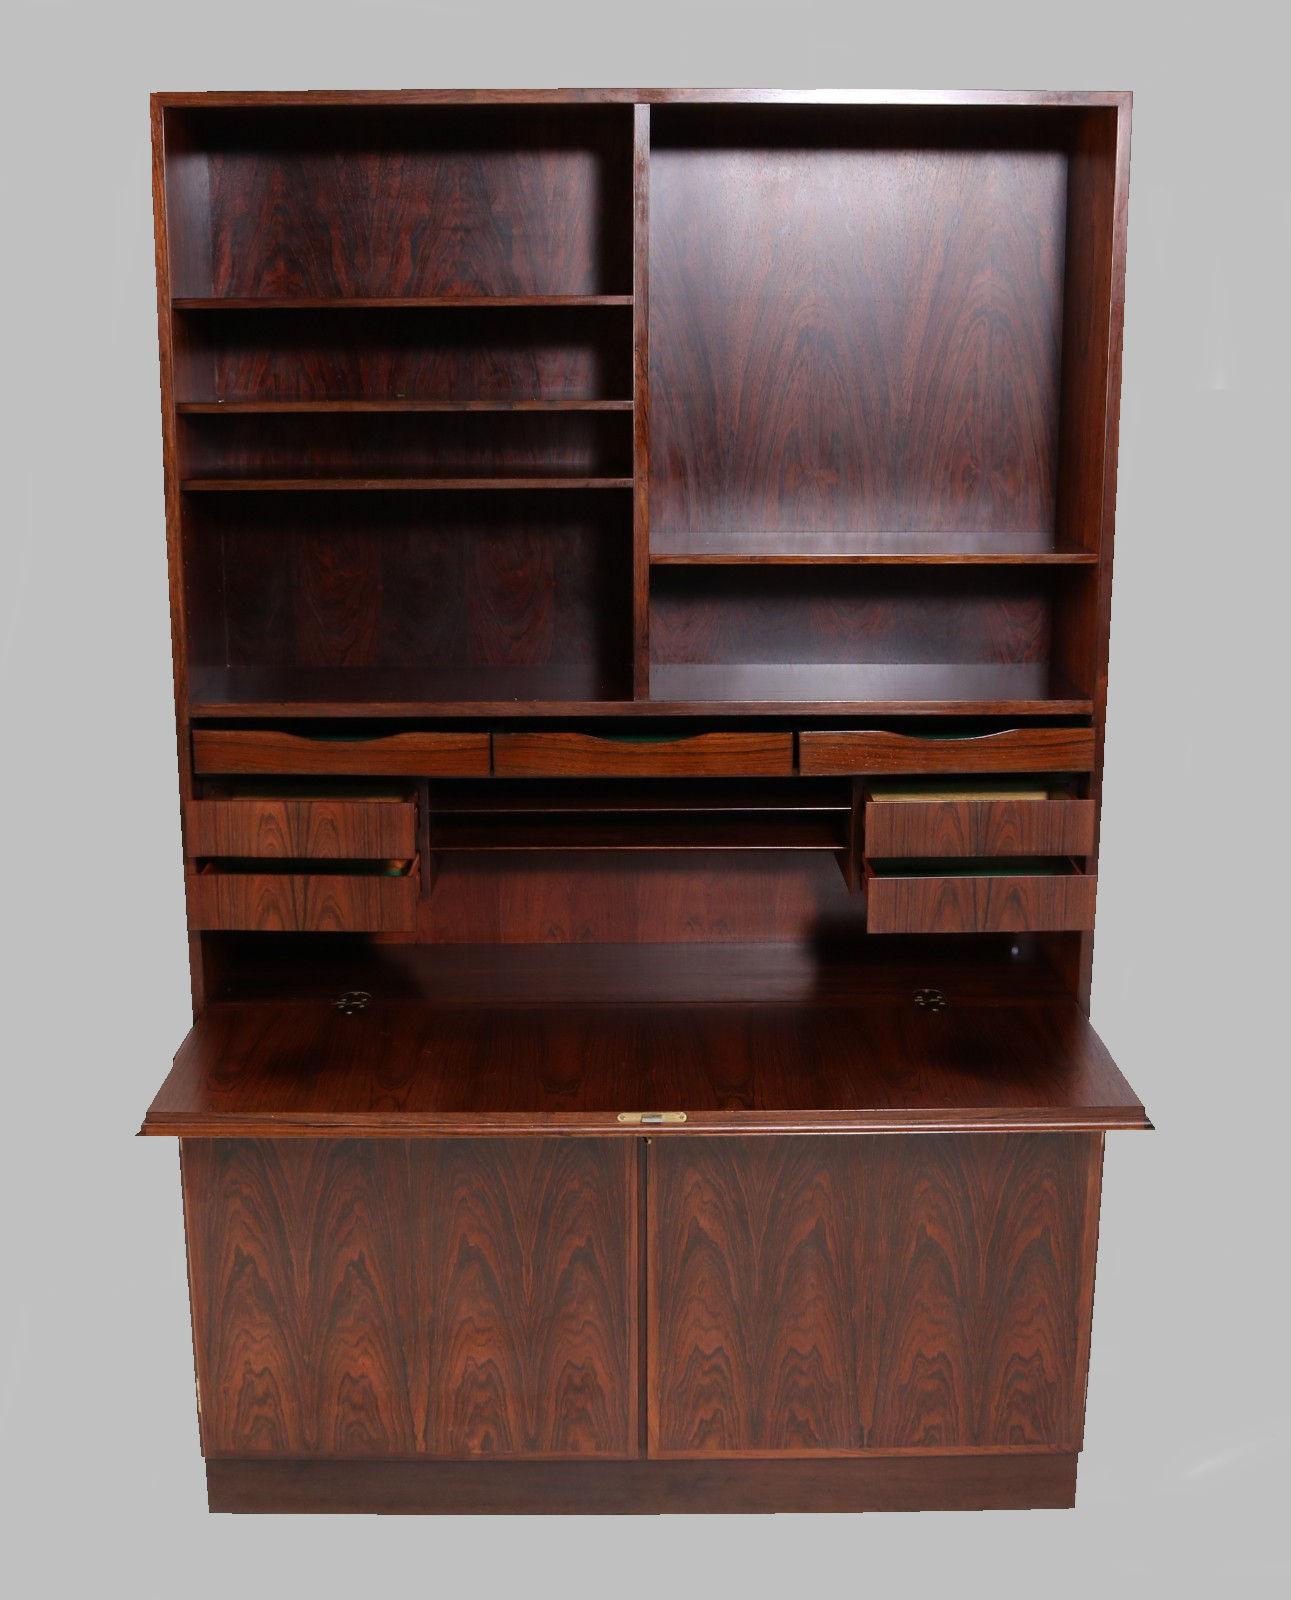 1960s-1970s rosewood shelf with integrated bureau unit and cabinet designed and produced by Omann Jun.

The unit can be split into a cabinet unit and a bureau/shelf unit and can be combined with more units into a larger bureau shelf unit.

The piece